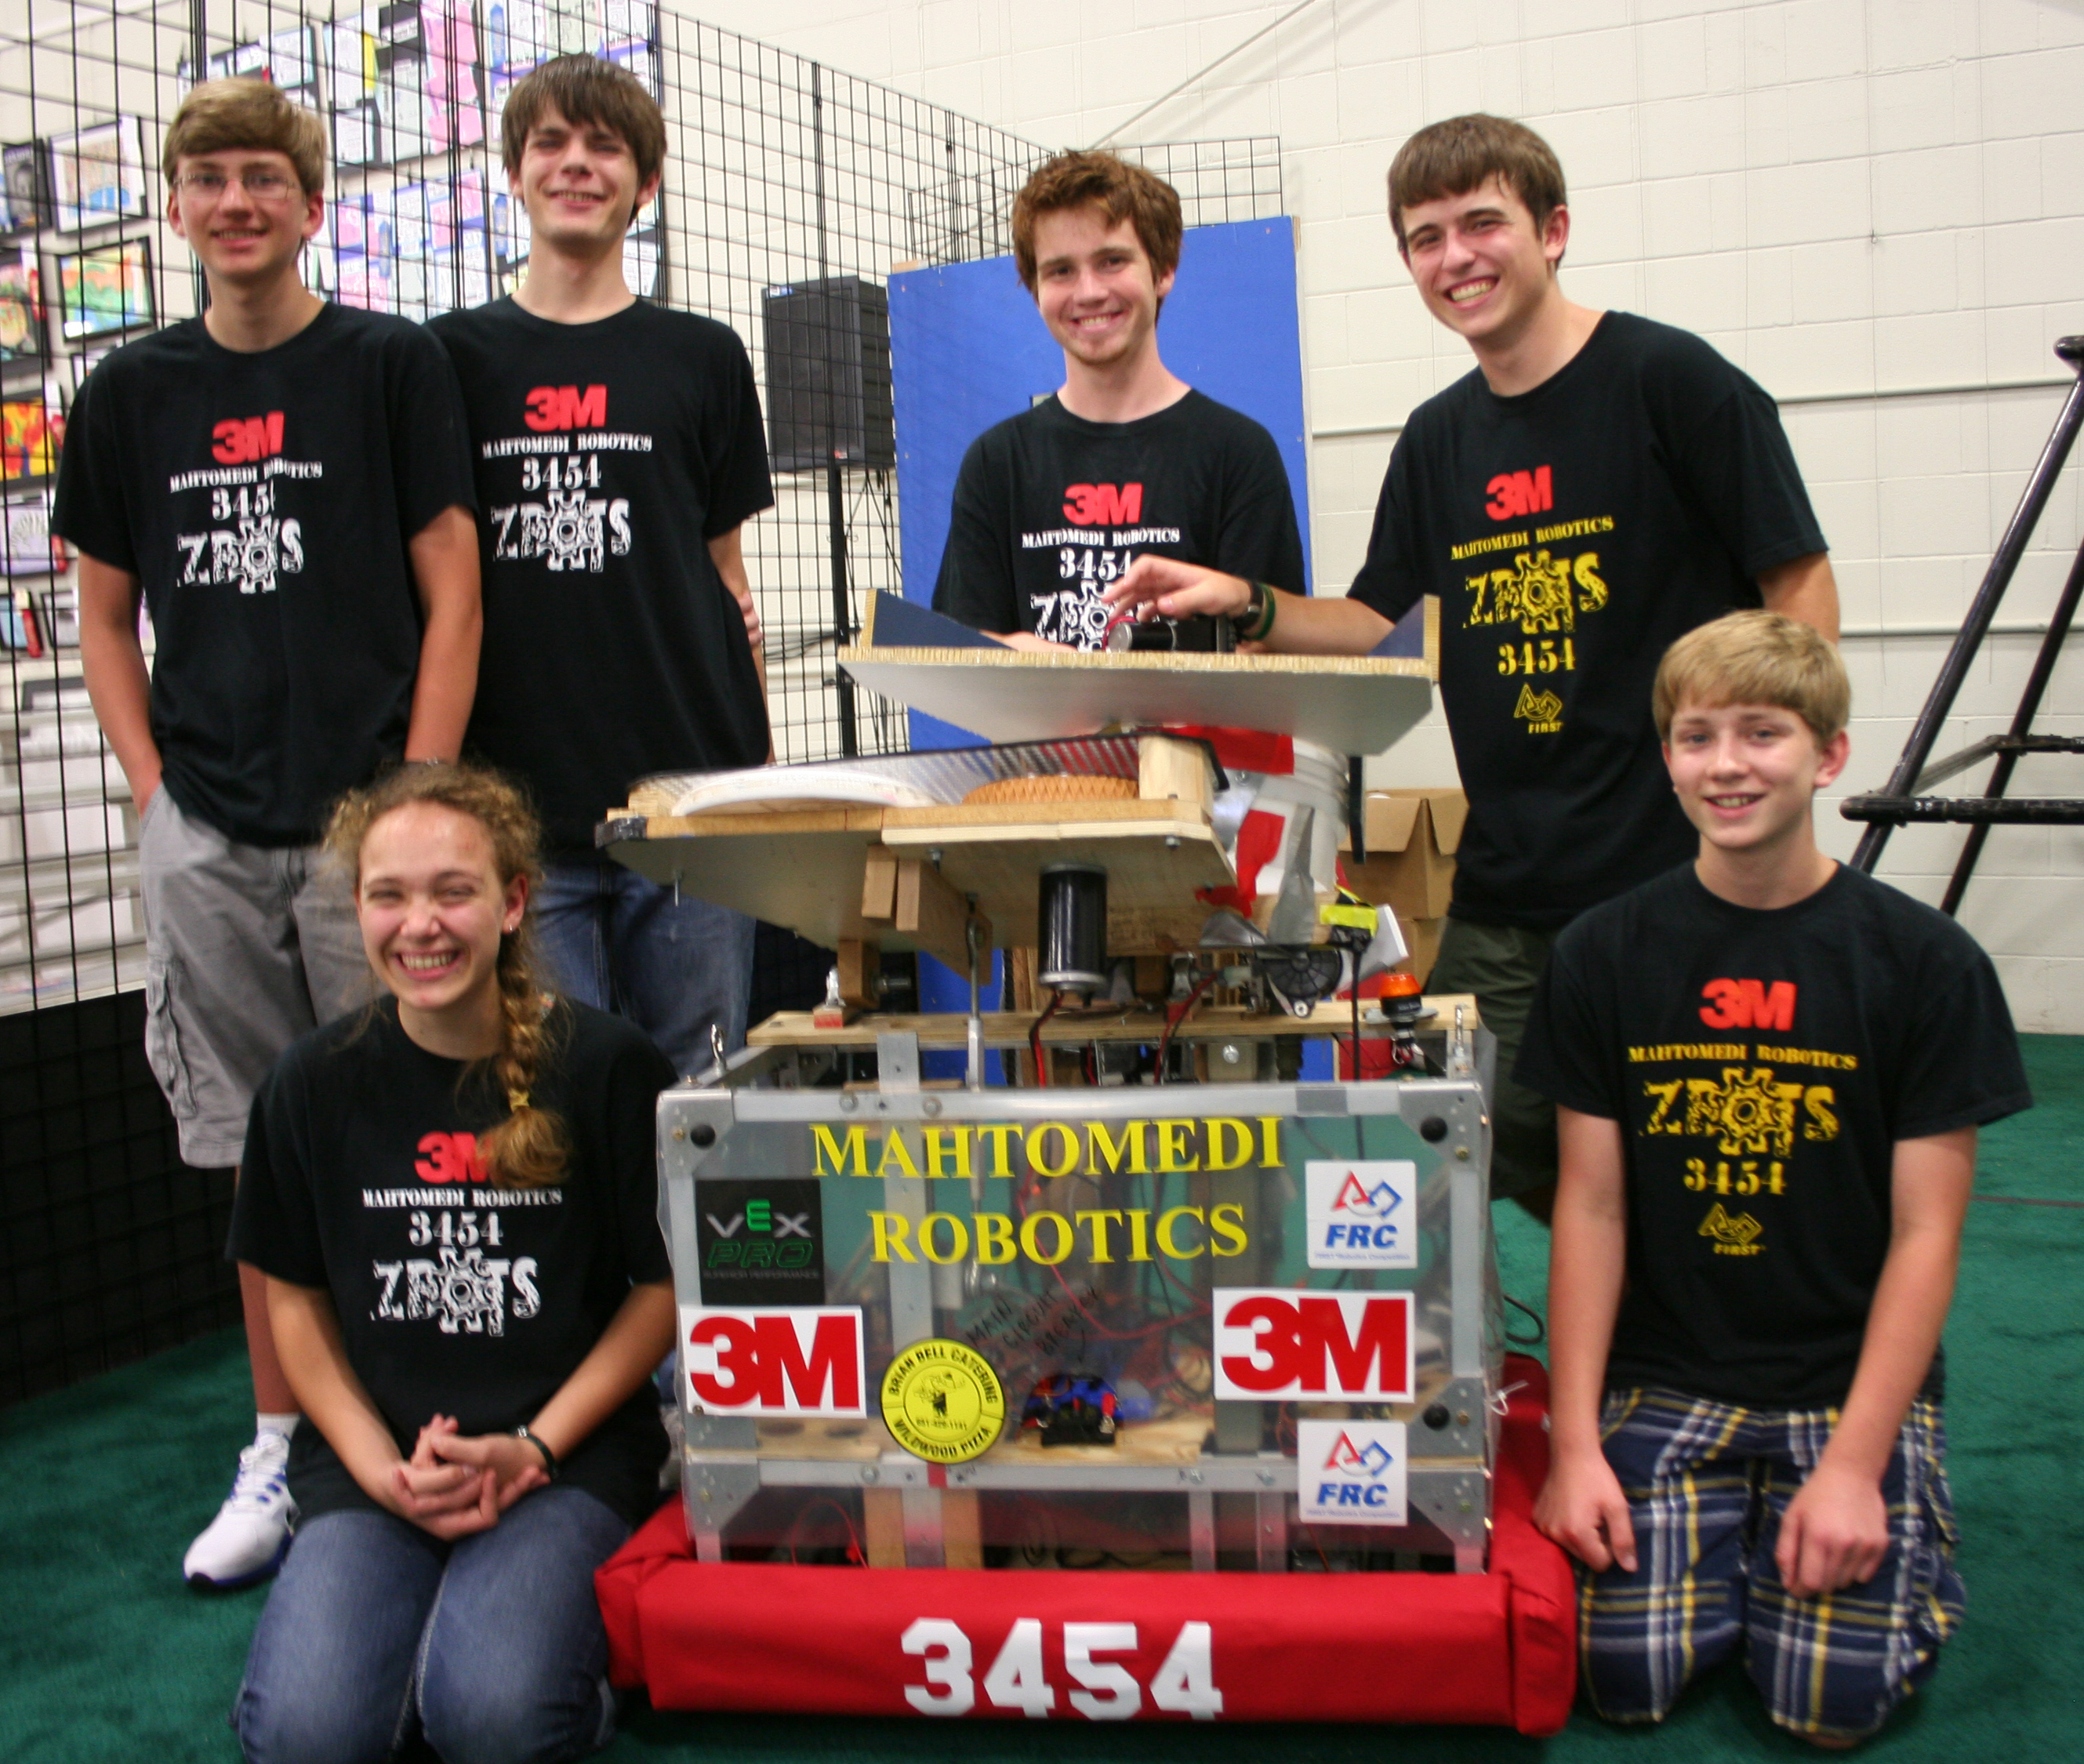 The Mahtomedi team with its robot. (credit: CBS)